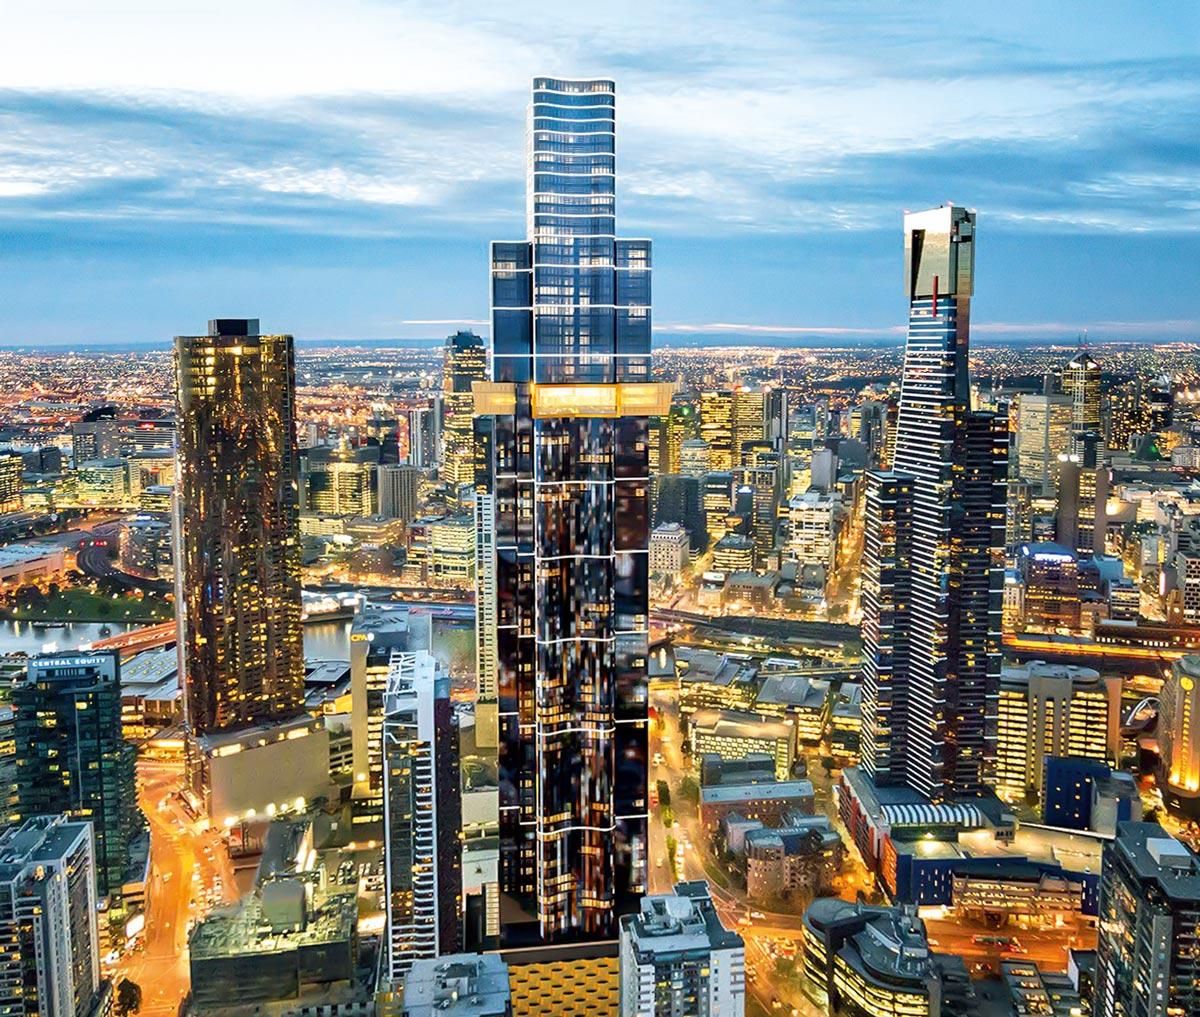 Australia 108 is located in Melbourne’s Southbank District and will include 1,105 apartments on 100 floors. Australia 108 is located in Melbourne’s Southbank District and will include 1,105 apartments on 100 floors.